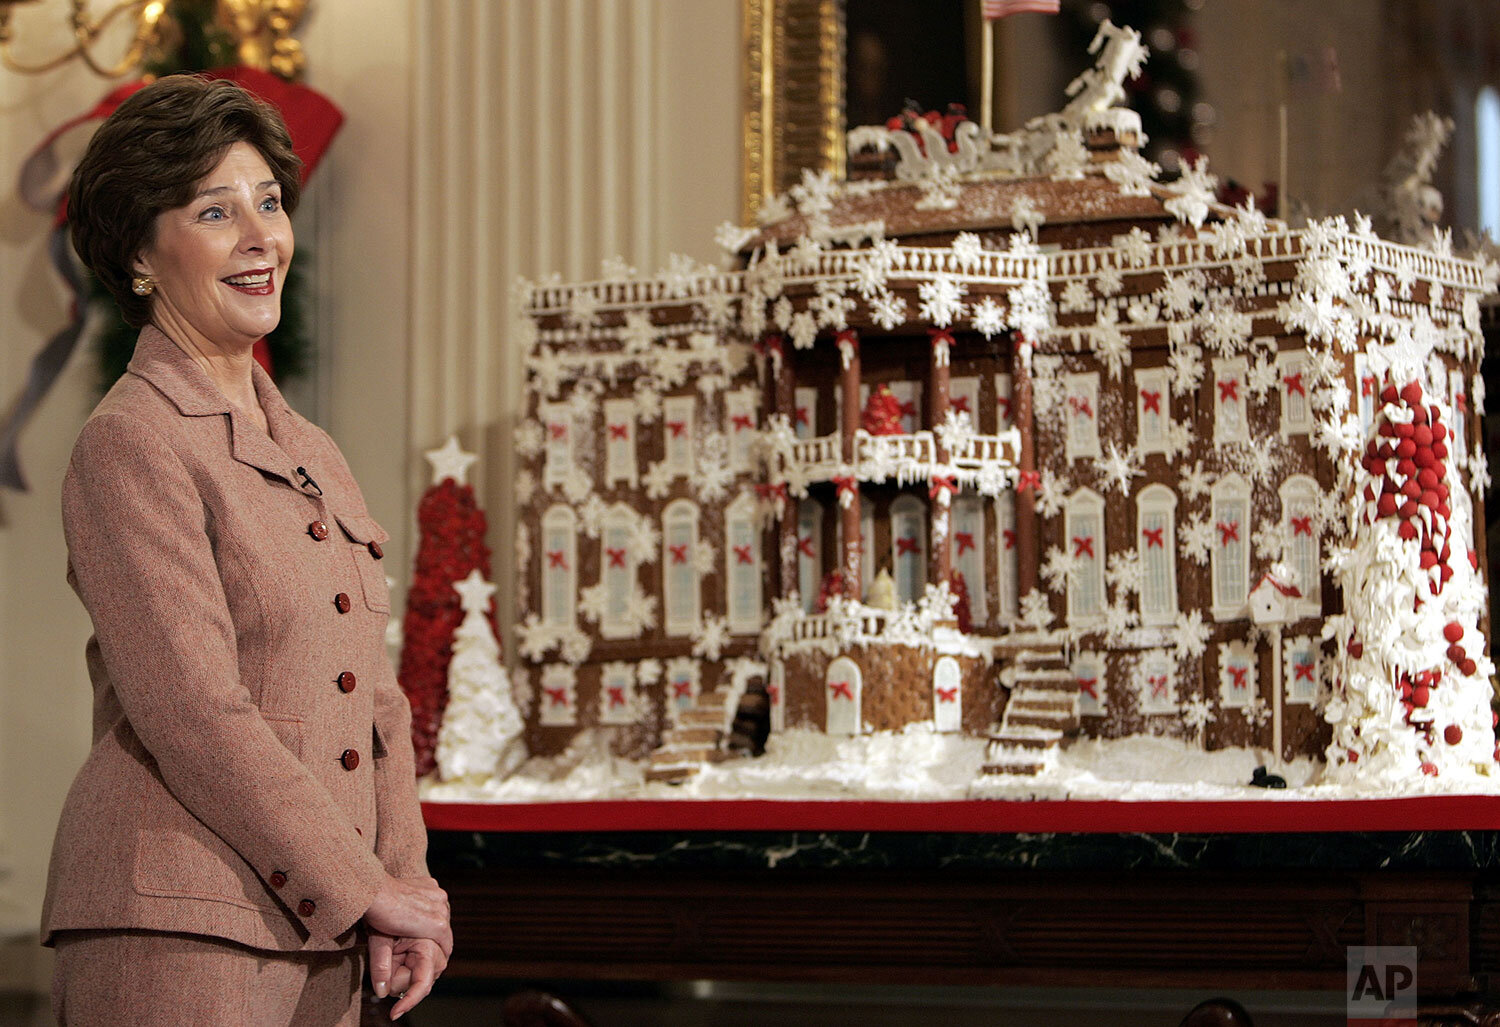  First lady Laura Bush shows of a ginger bread White House while hosting a media preview of the 2006 holiday decorations at the White House in Washington, Thursday, Nov. 30, 2006. (AP Photo/Ron Edmonds) 